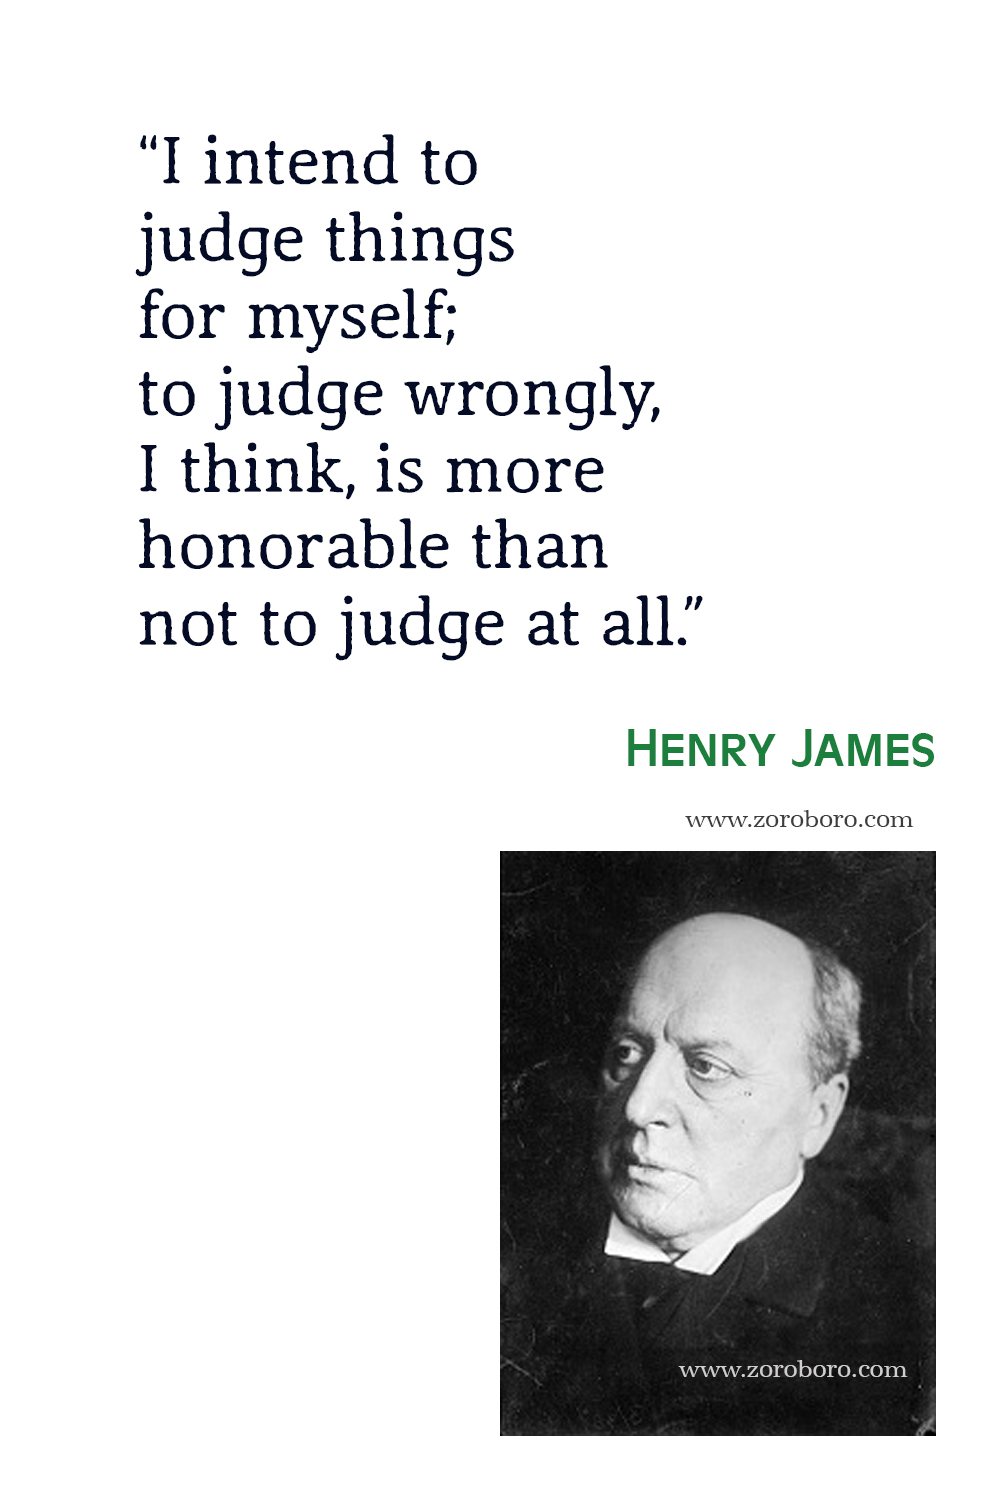 Henry James Quotes, Henry James The Portrait of a Lady Quotes, Henry James Books, Henry James Roderick Hudson Quotes. Henry James Short Stories.